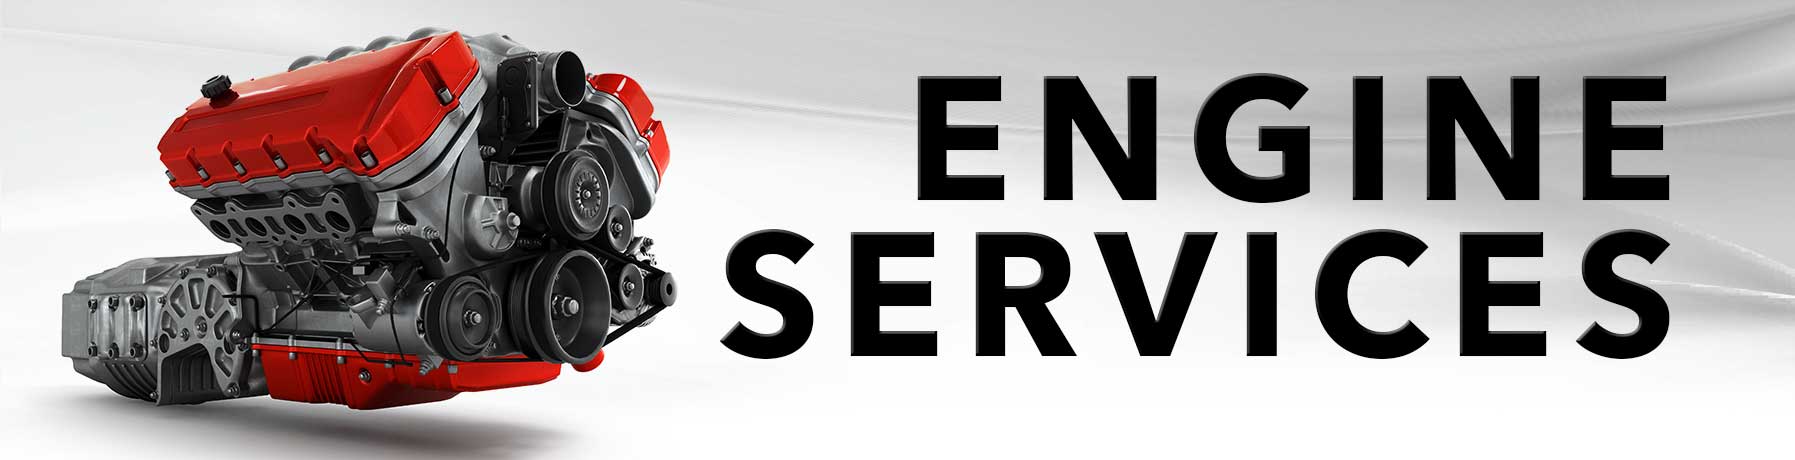 Engine Service banner image with picture of an engine block